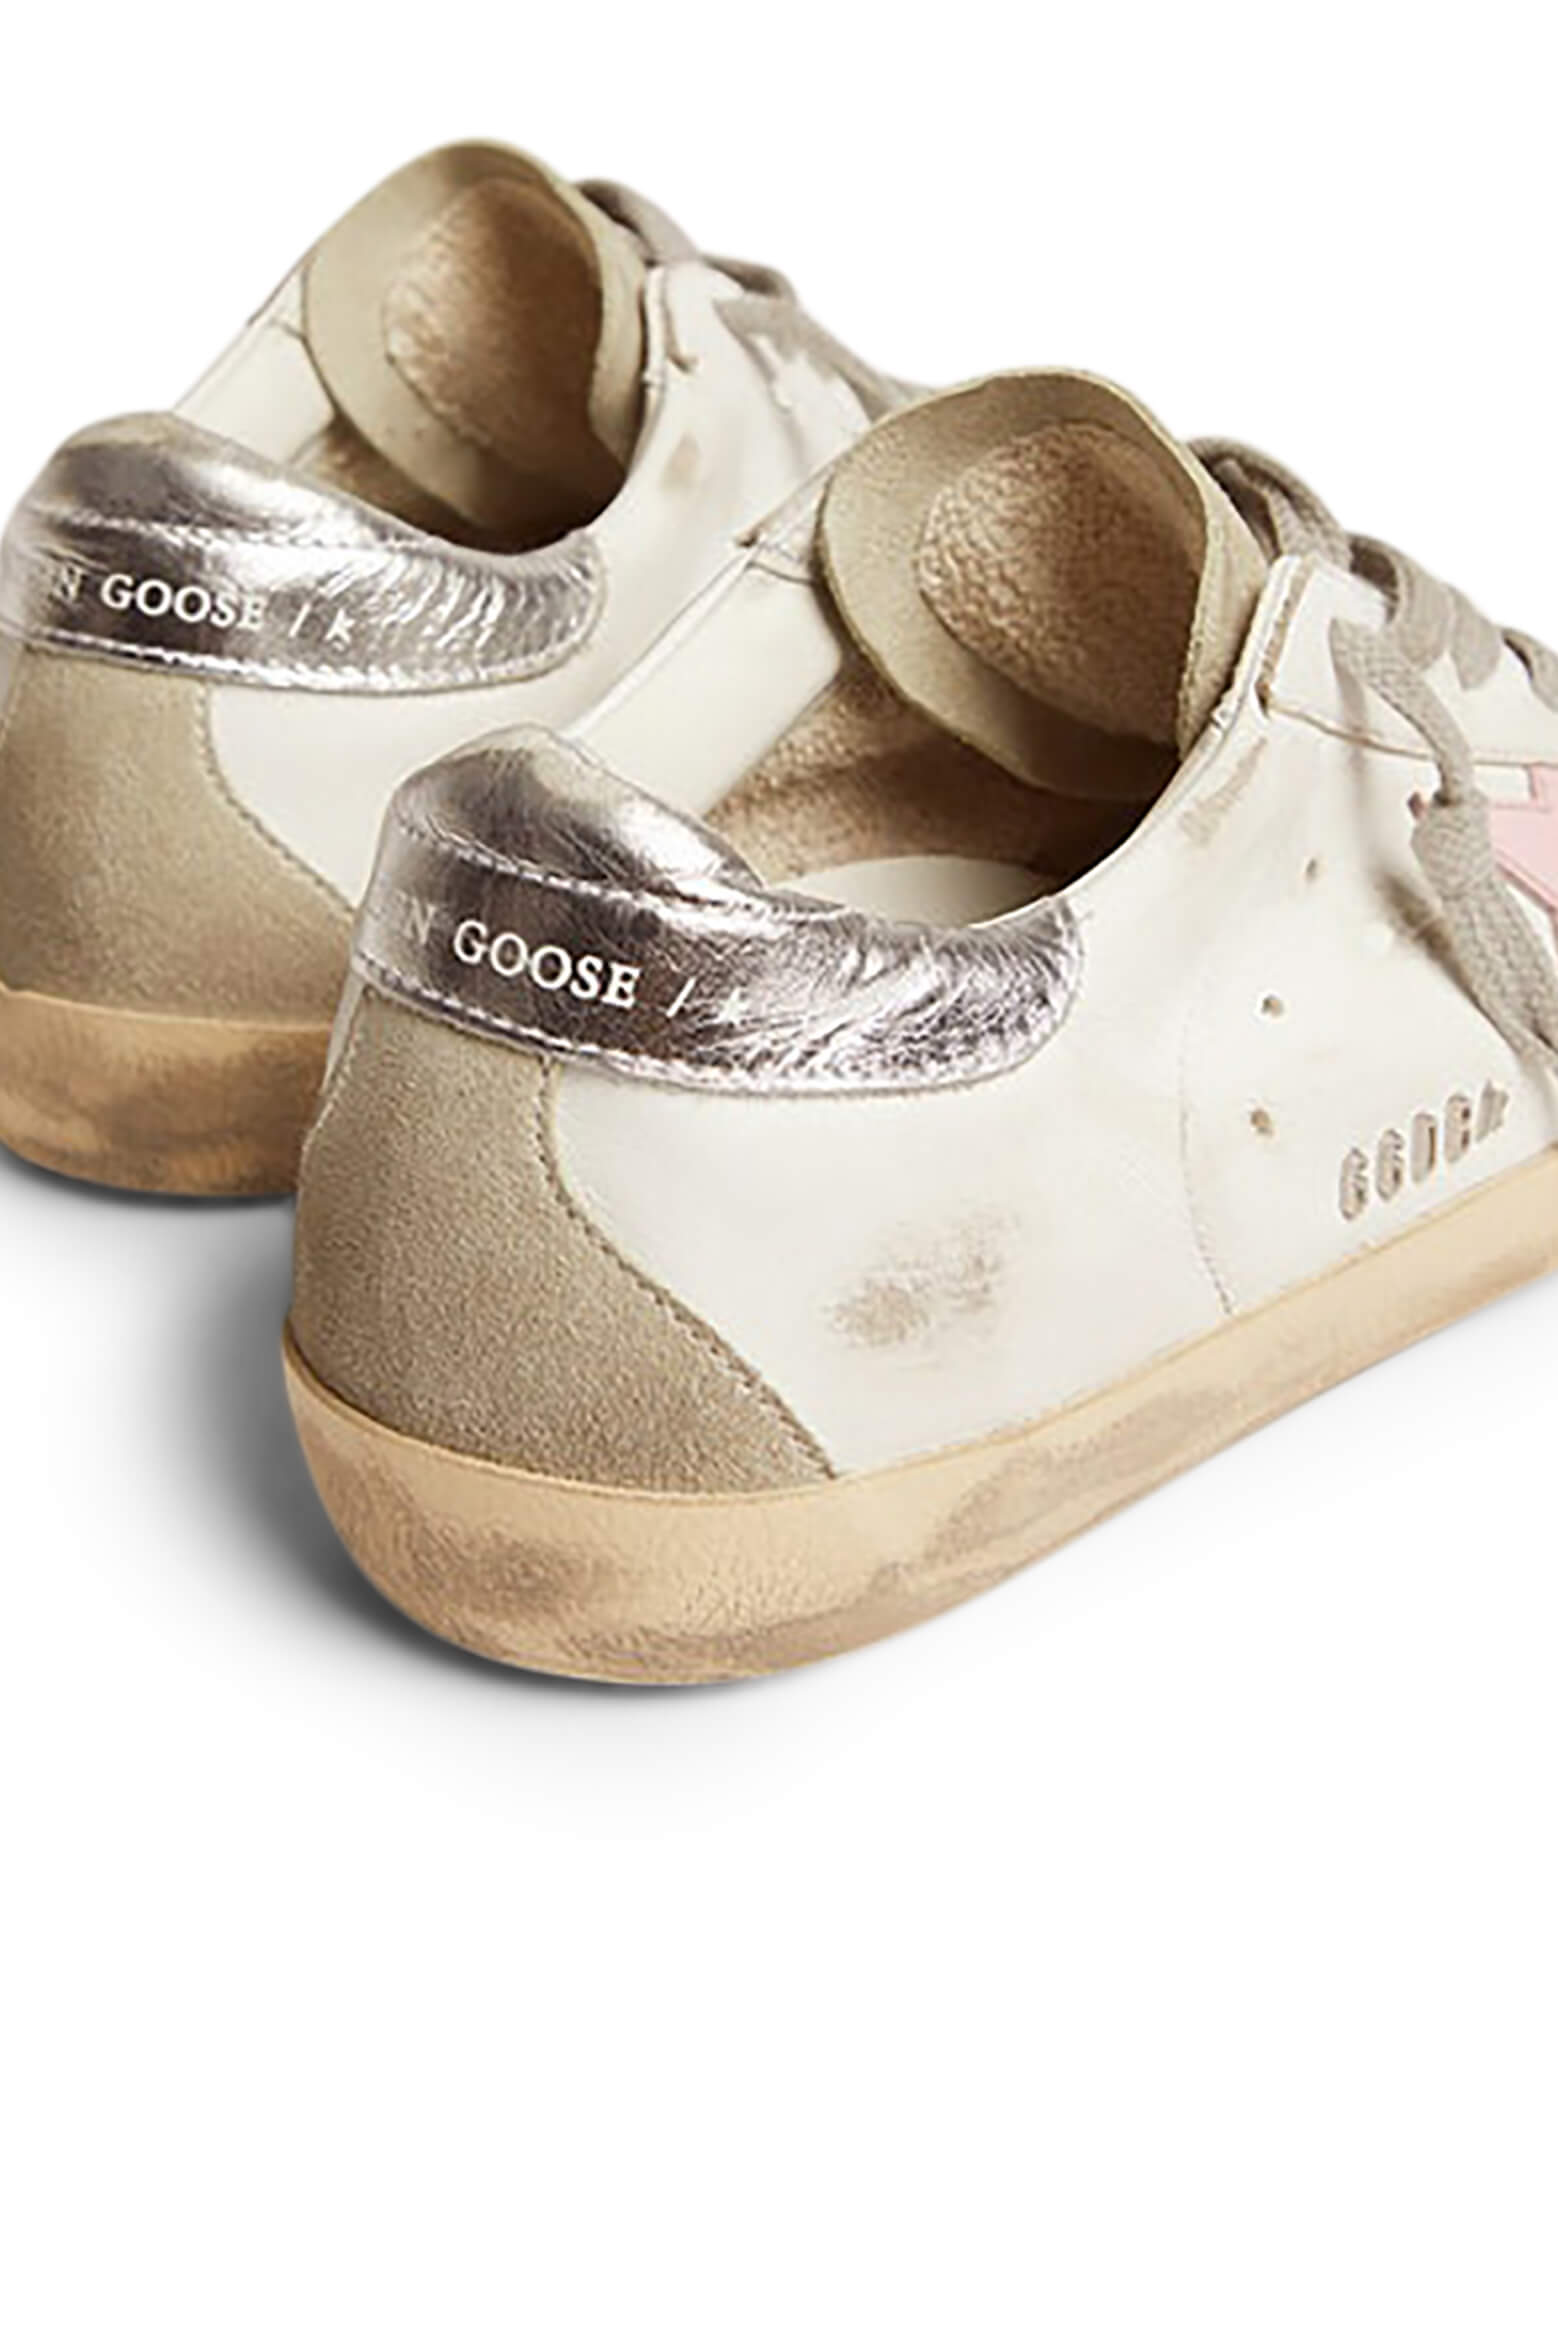 Golden Goose Superstar Sneakers in White Ice Orchid Pink and Silver from The New Trend